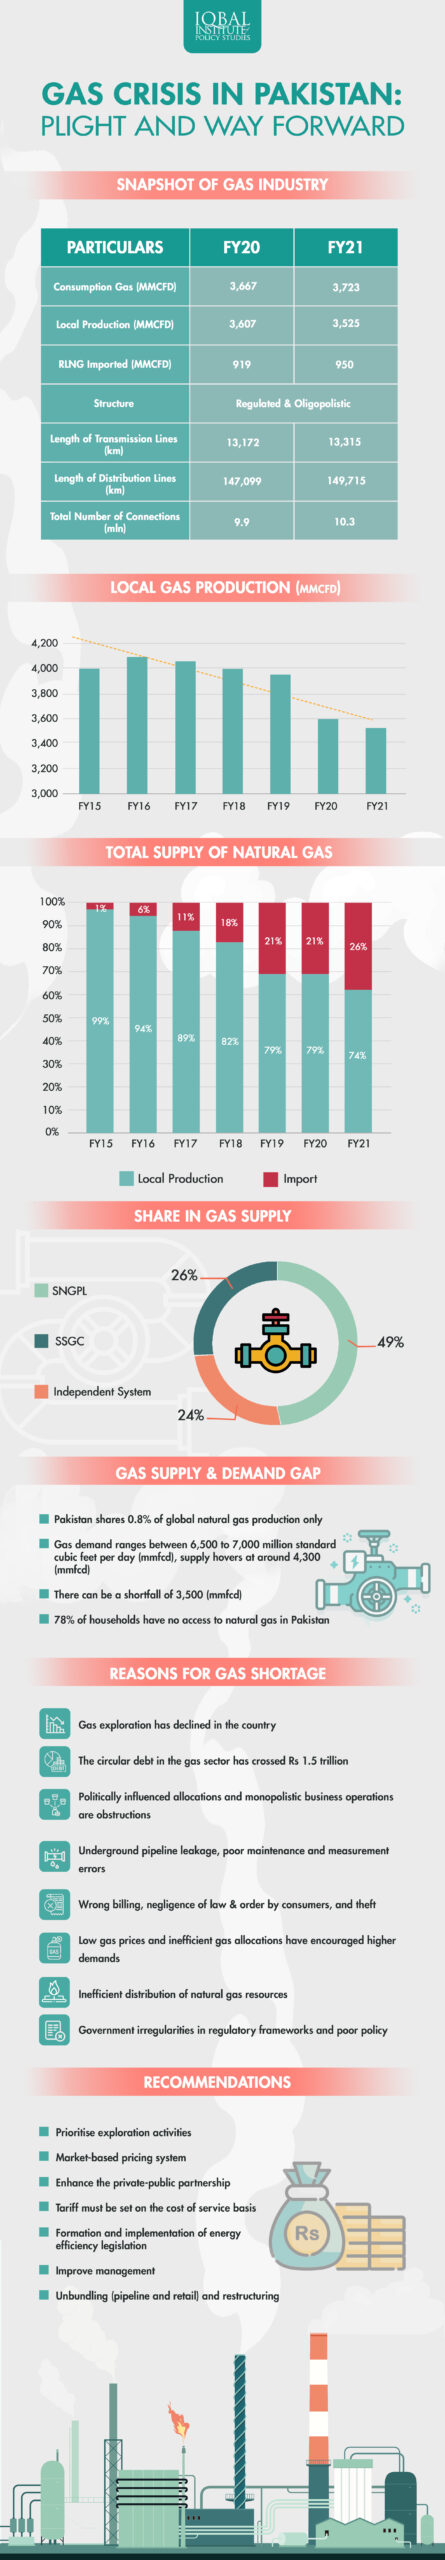 Gas Crisis In Pakistan: Plight and Way Forward